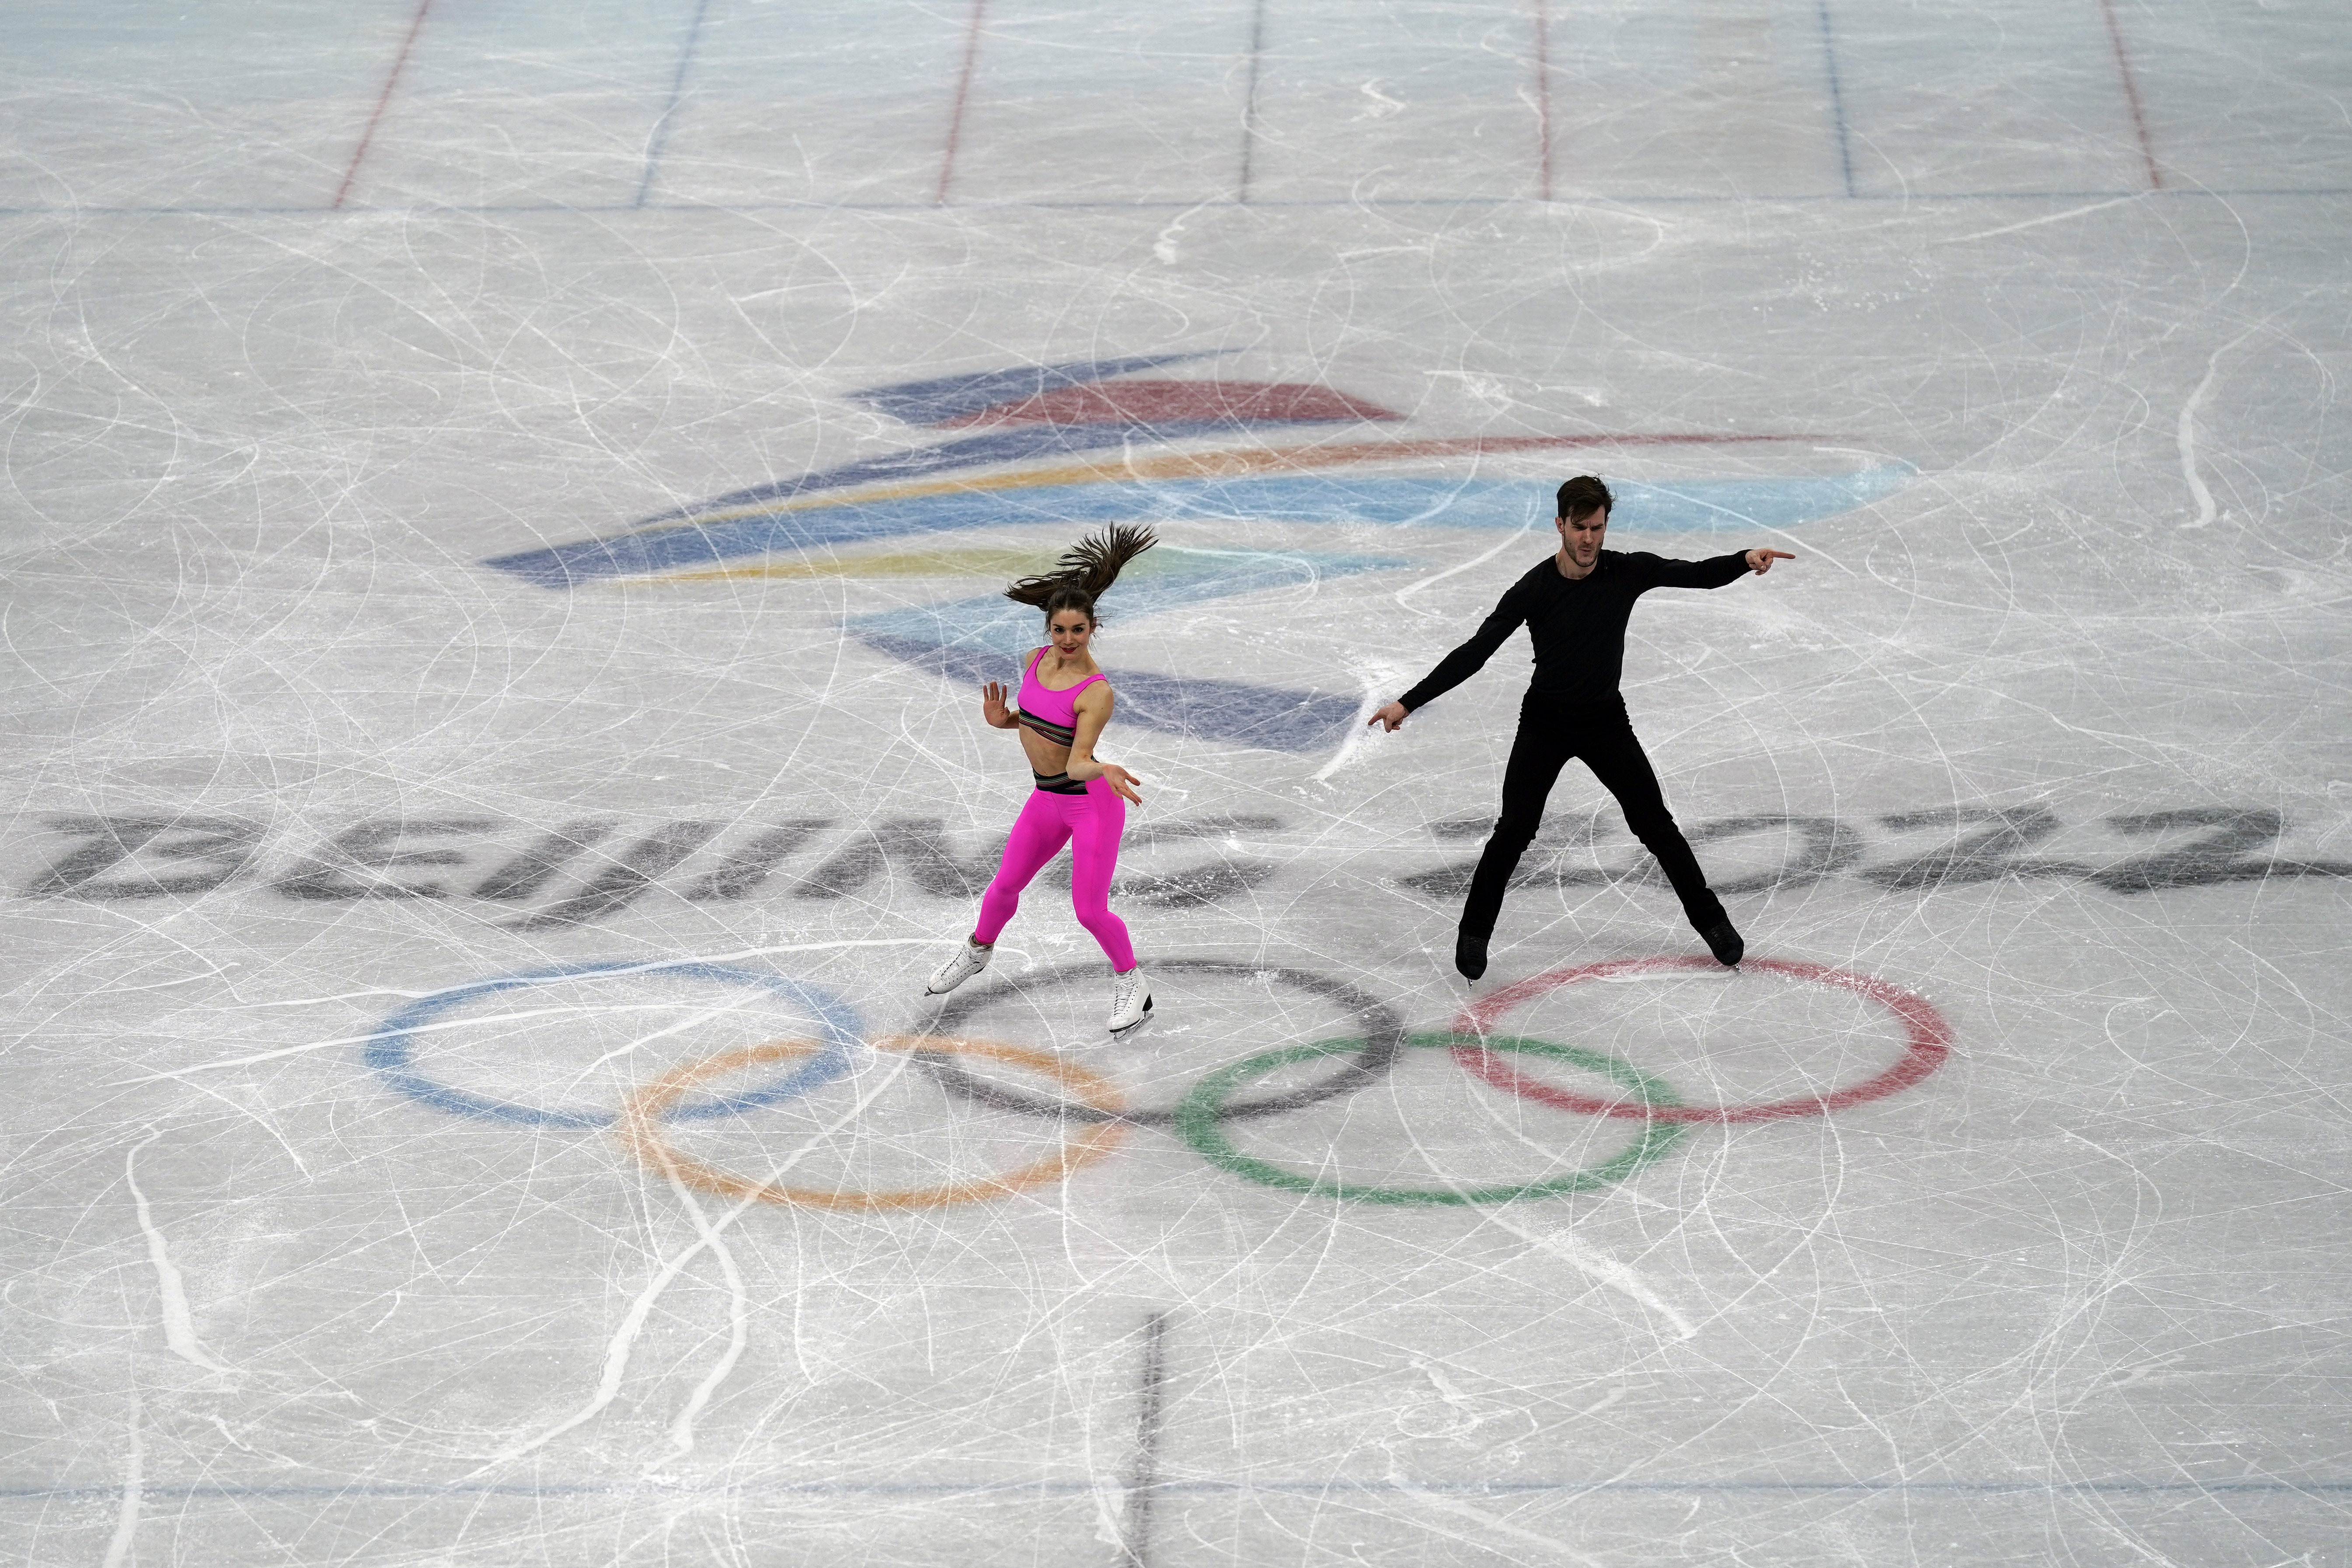 Winter Olympics figure skating schedule Live stream, start time, TV channel, how to watch